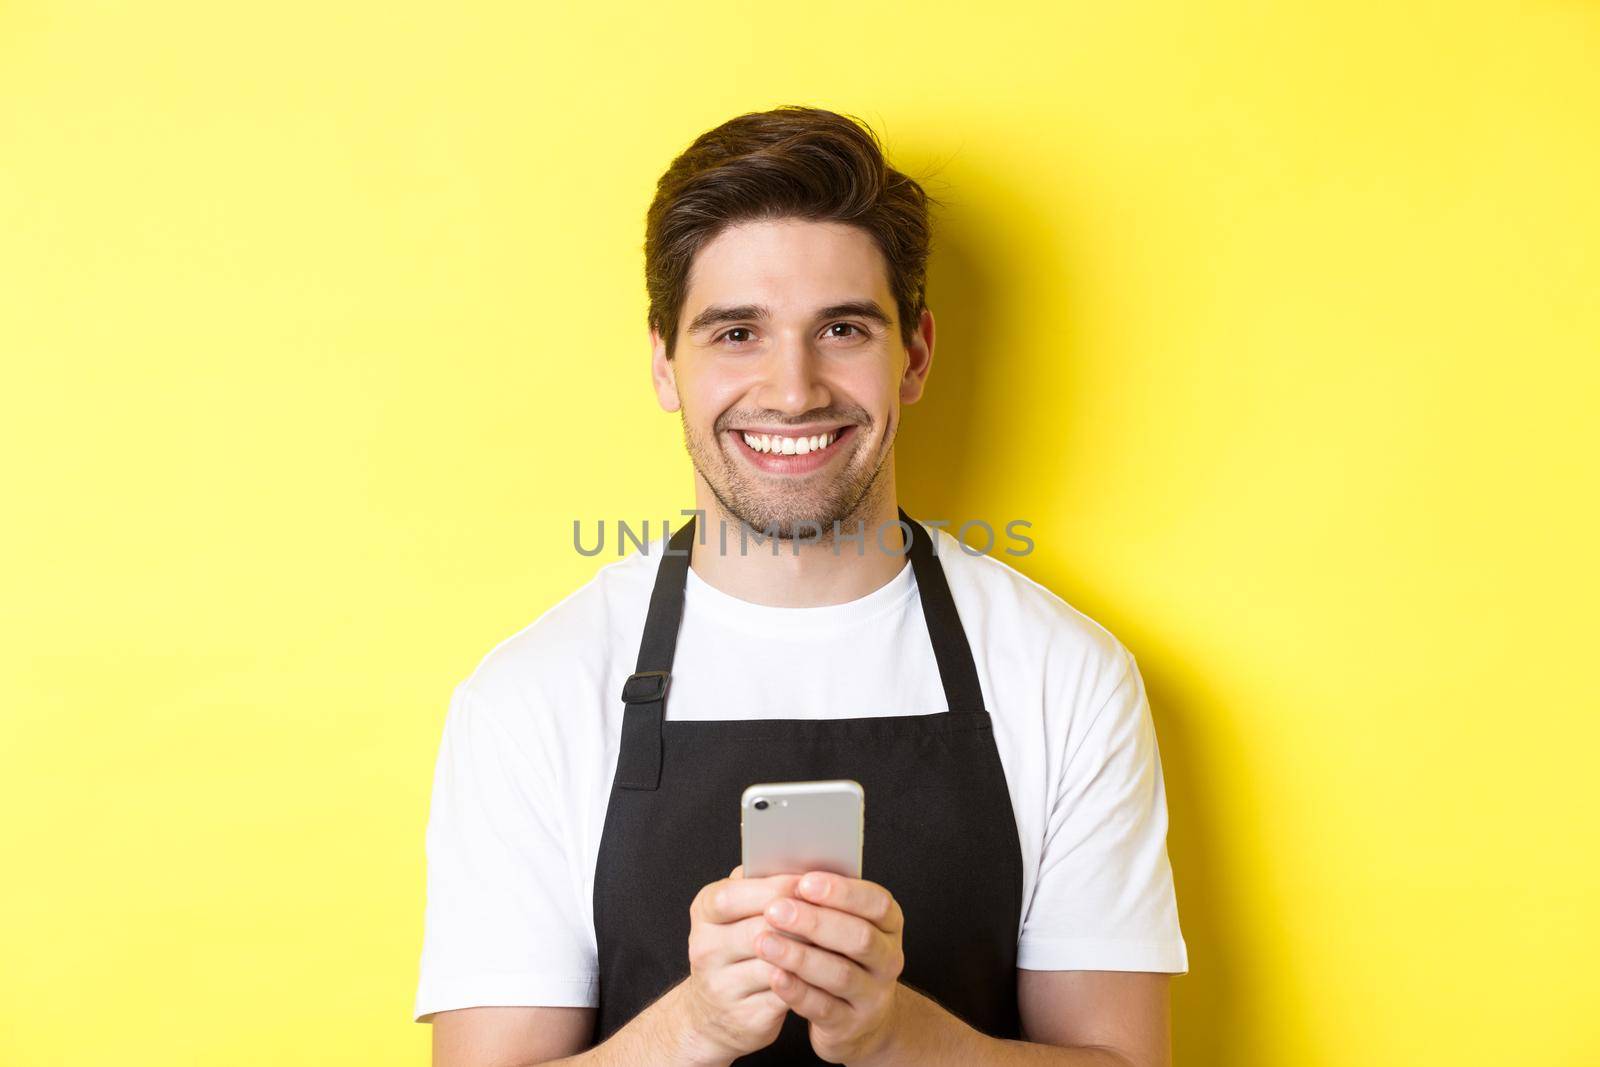 Close-up of handsome barista sending message on mobile phone, smiling happy, standing over yellow background.